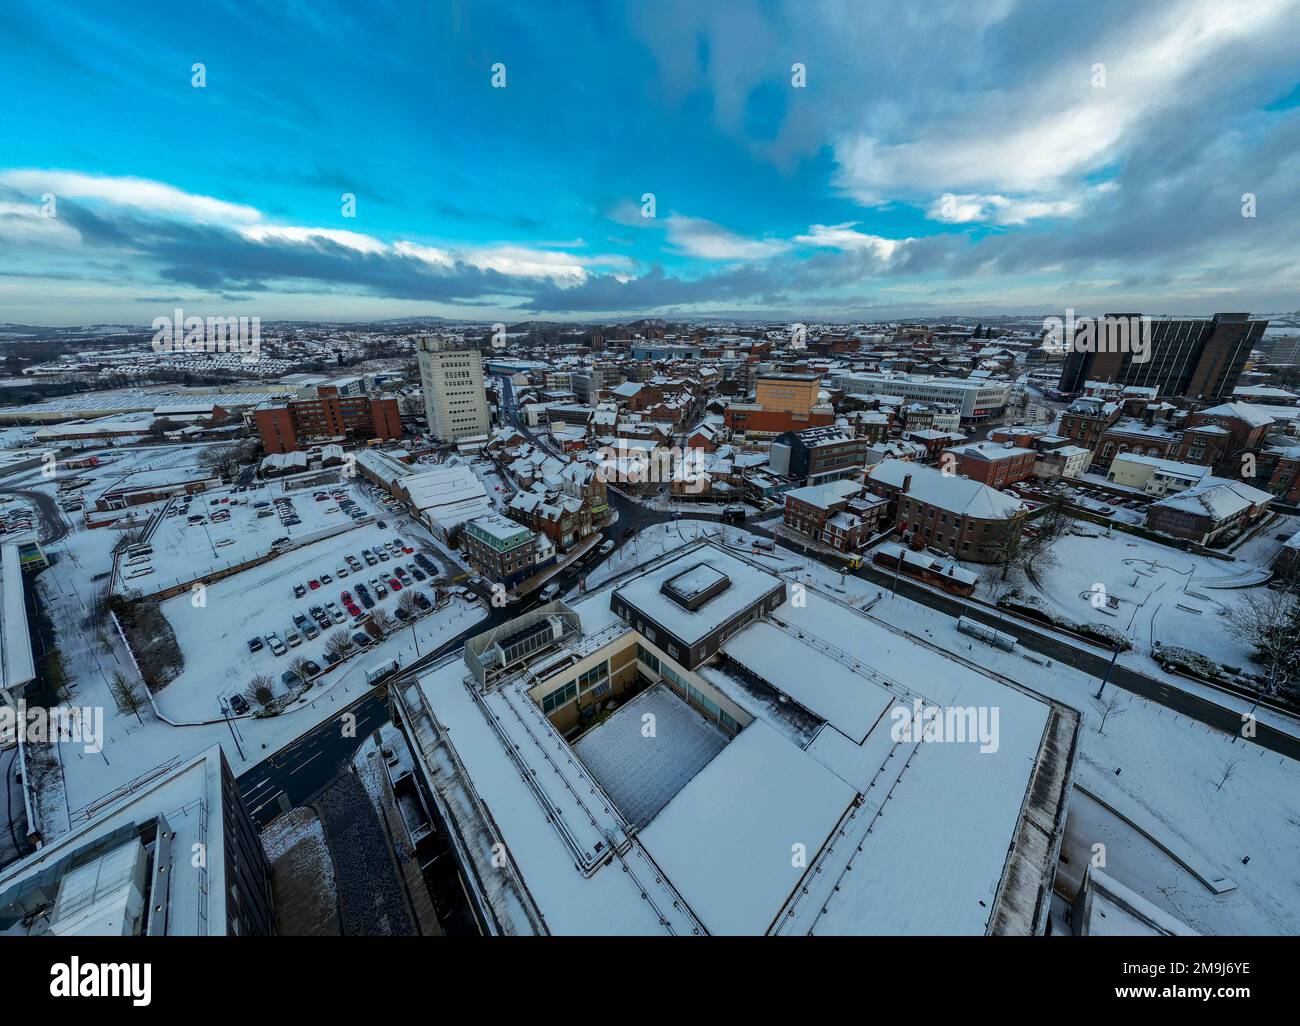 Random Drone Shots aerial Images From Stoke-On-Trent Stock Photo